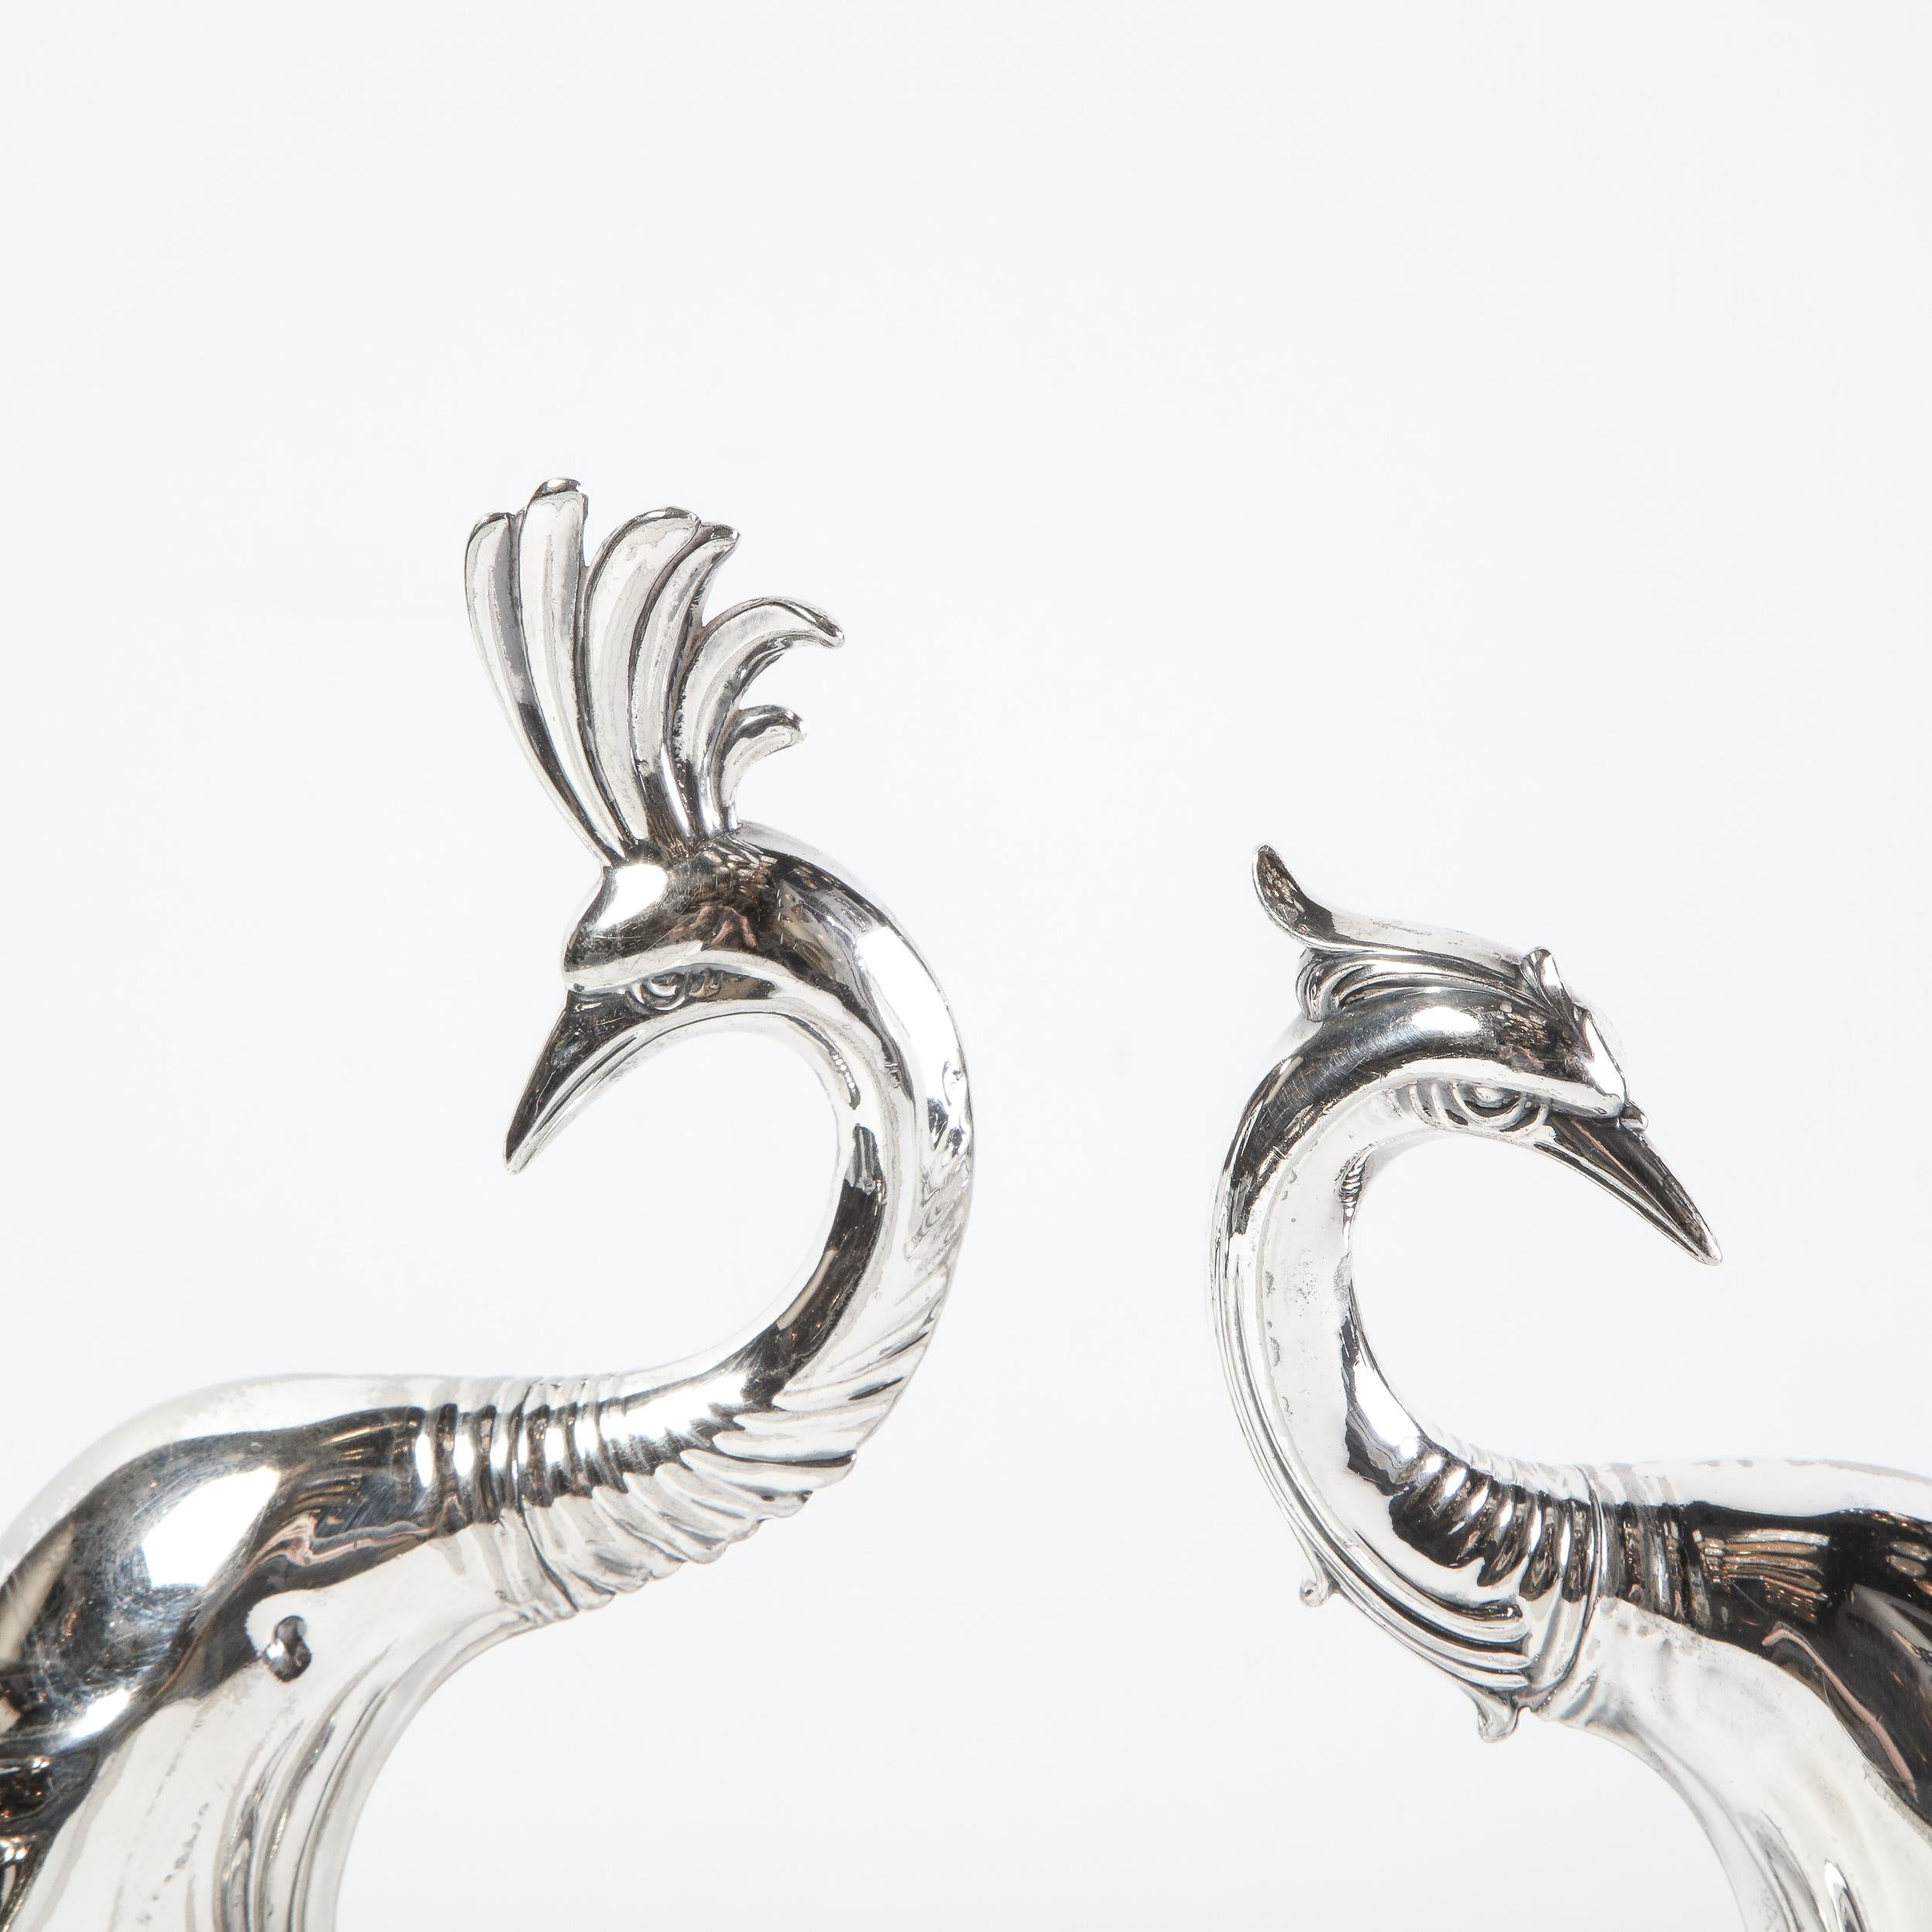 American Pair of 1930s Art Deco Silverplated Stylized Peacock Sculptures by Weidlich Bros